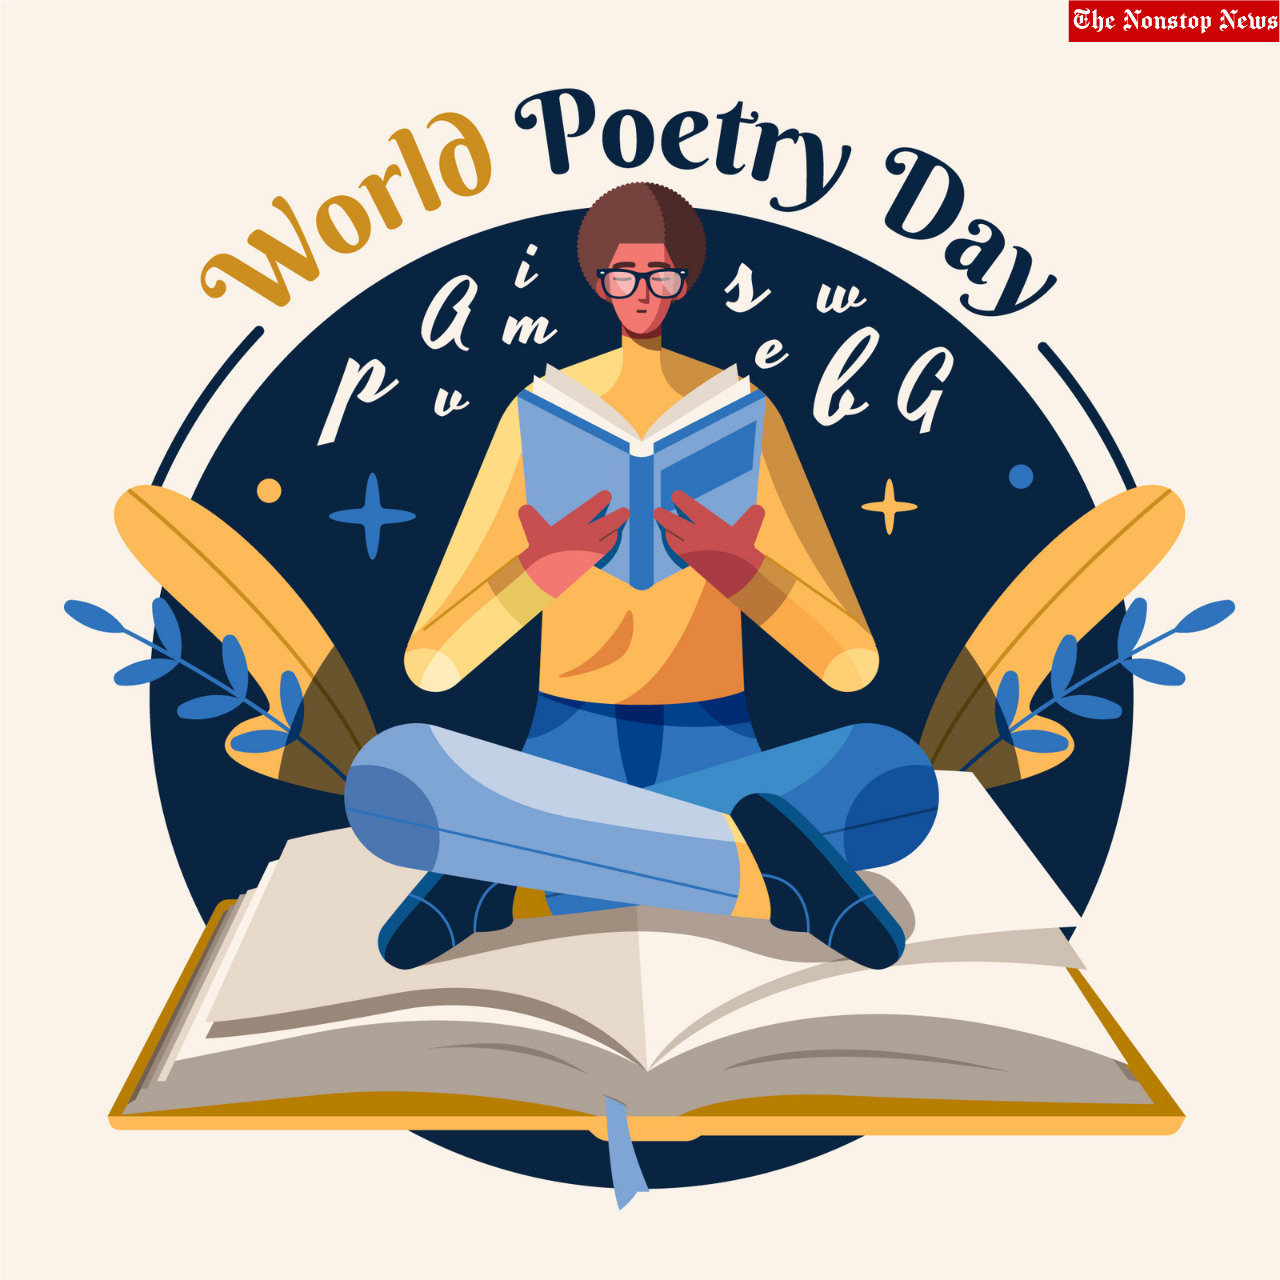 World Poetry Day 2022 Quotes, Posters, Poems, Slogans, HD Images, Messages to Share